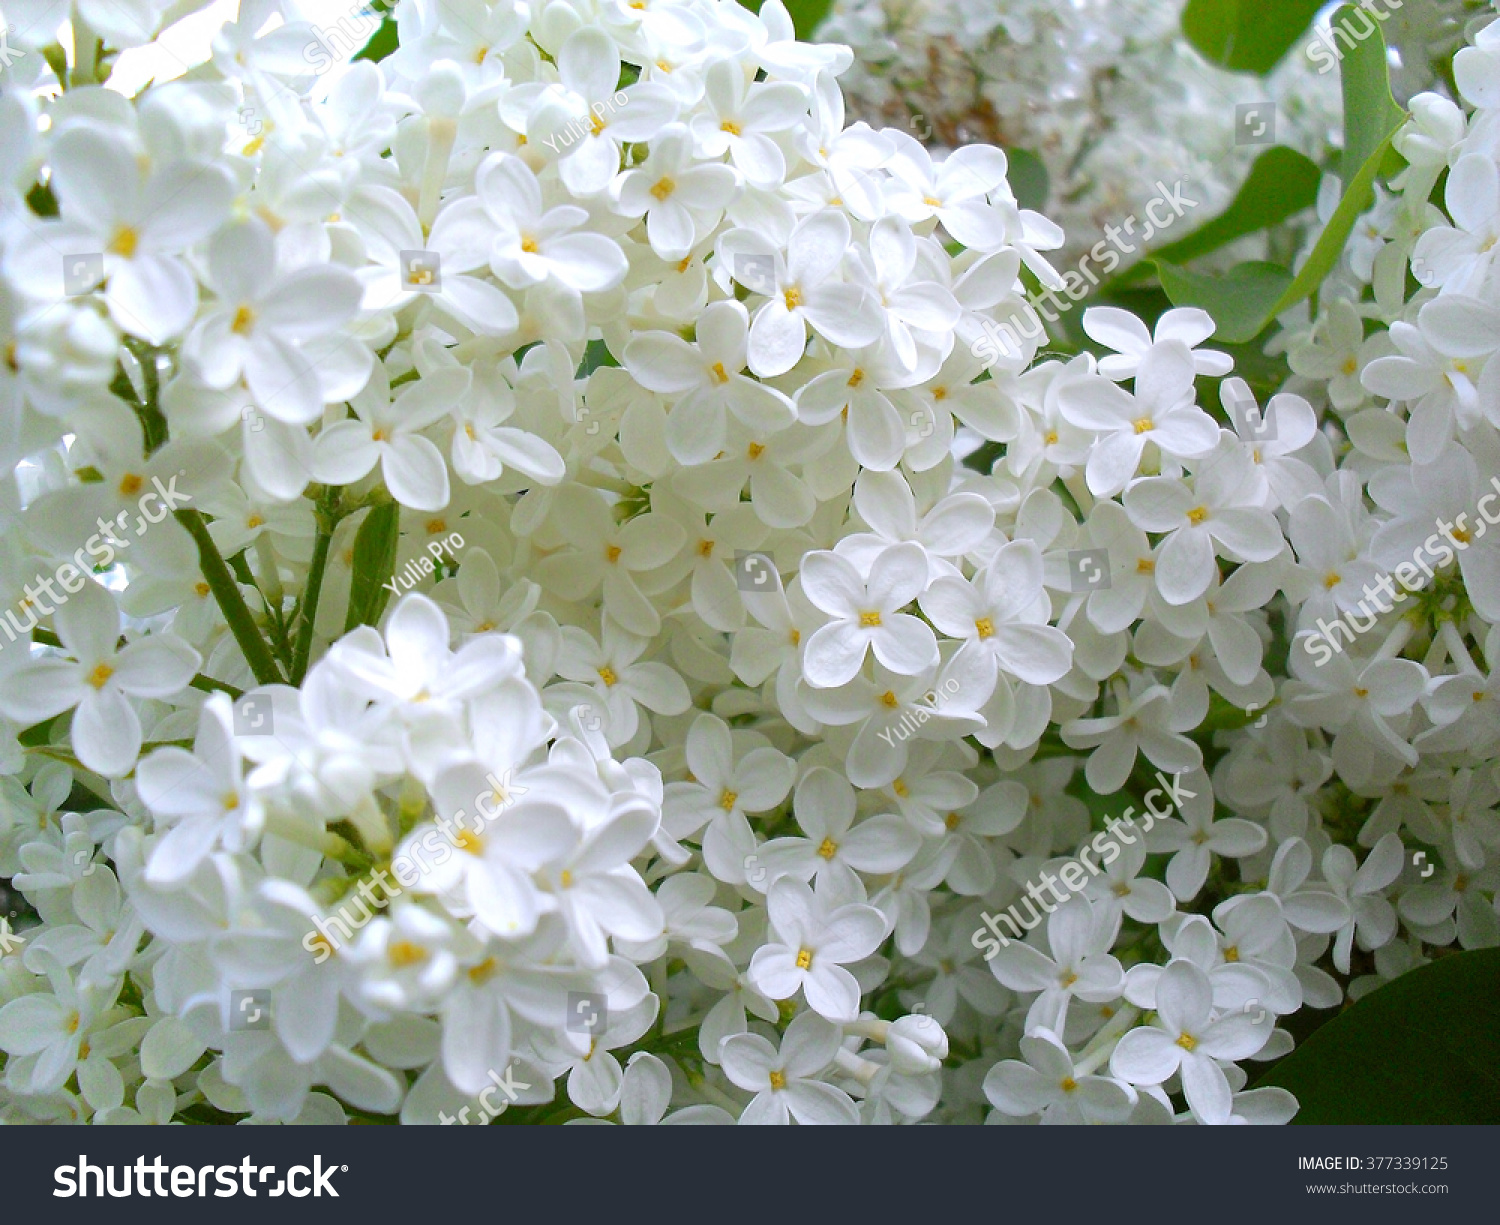 Beautiful Lilac Bush White Lilac Flowers Stock Photo Edit Now 377339125,Kids Dictionary Images